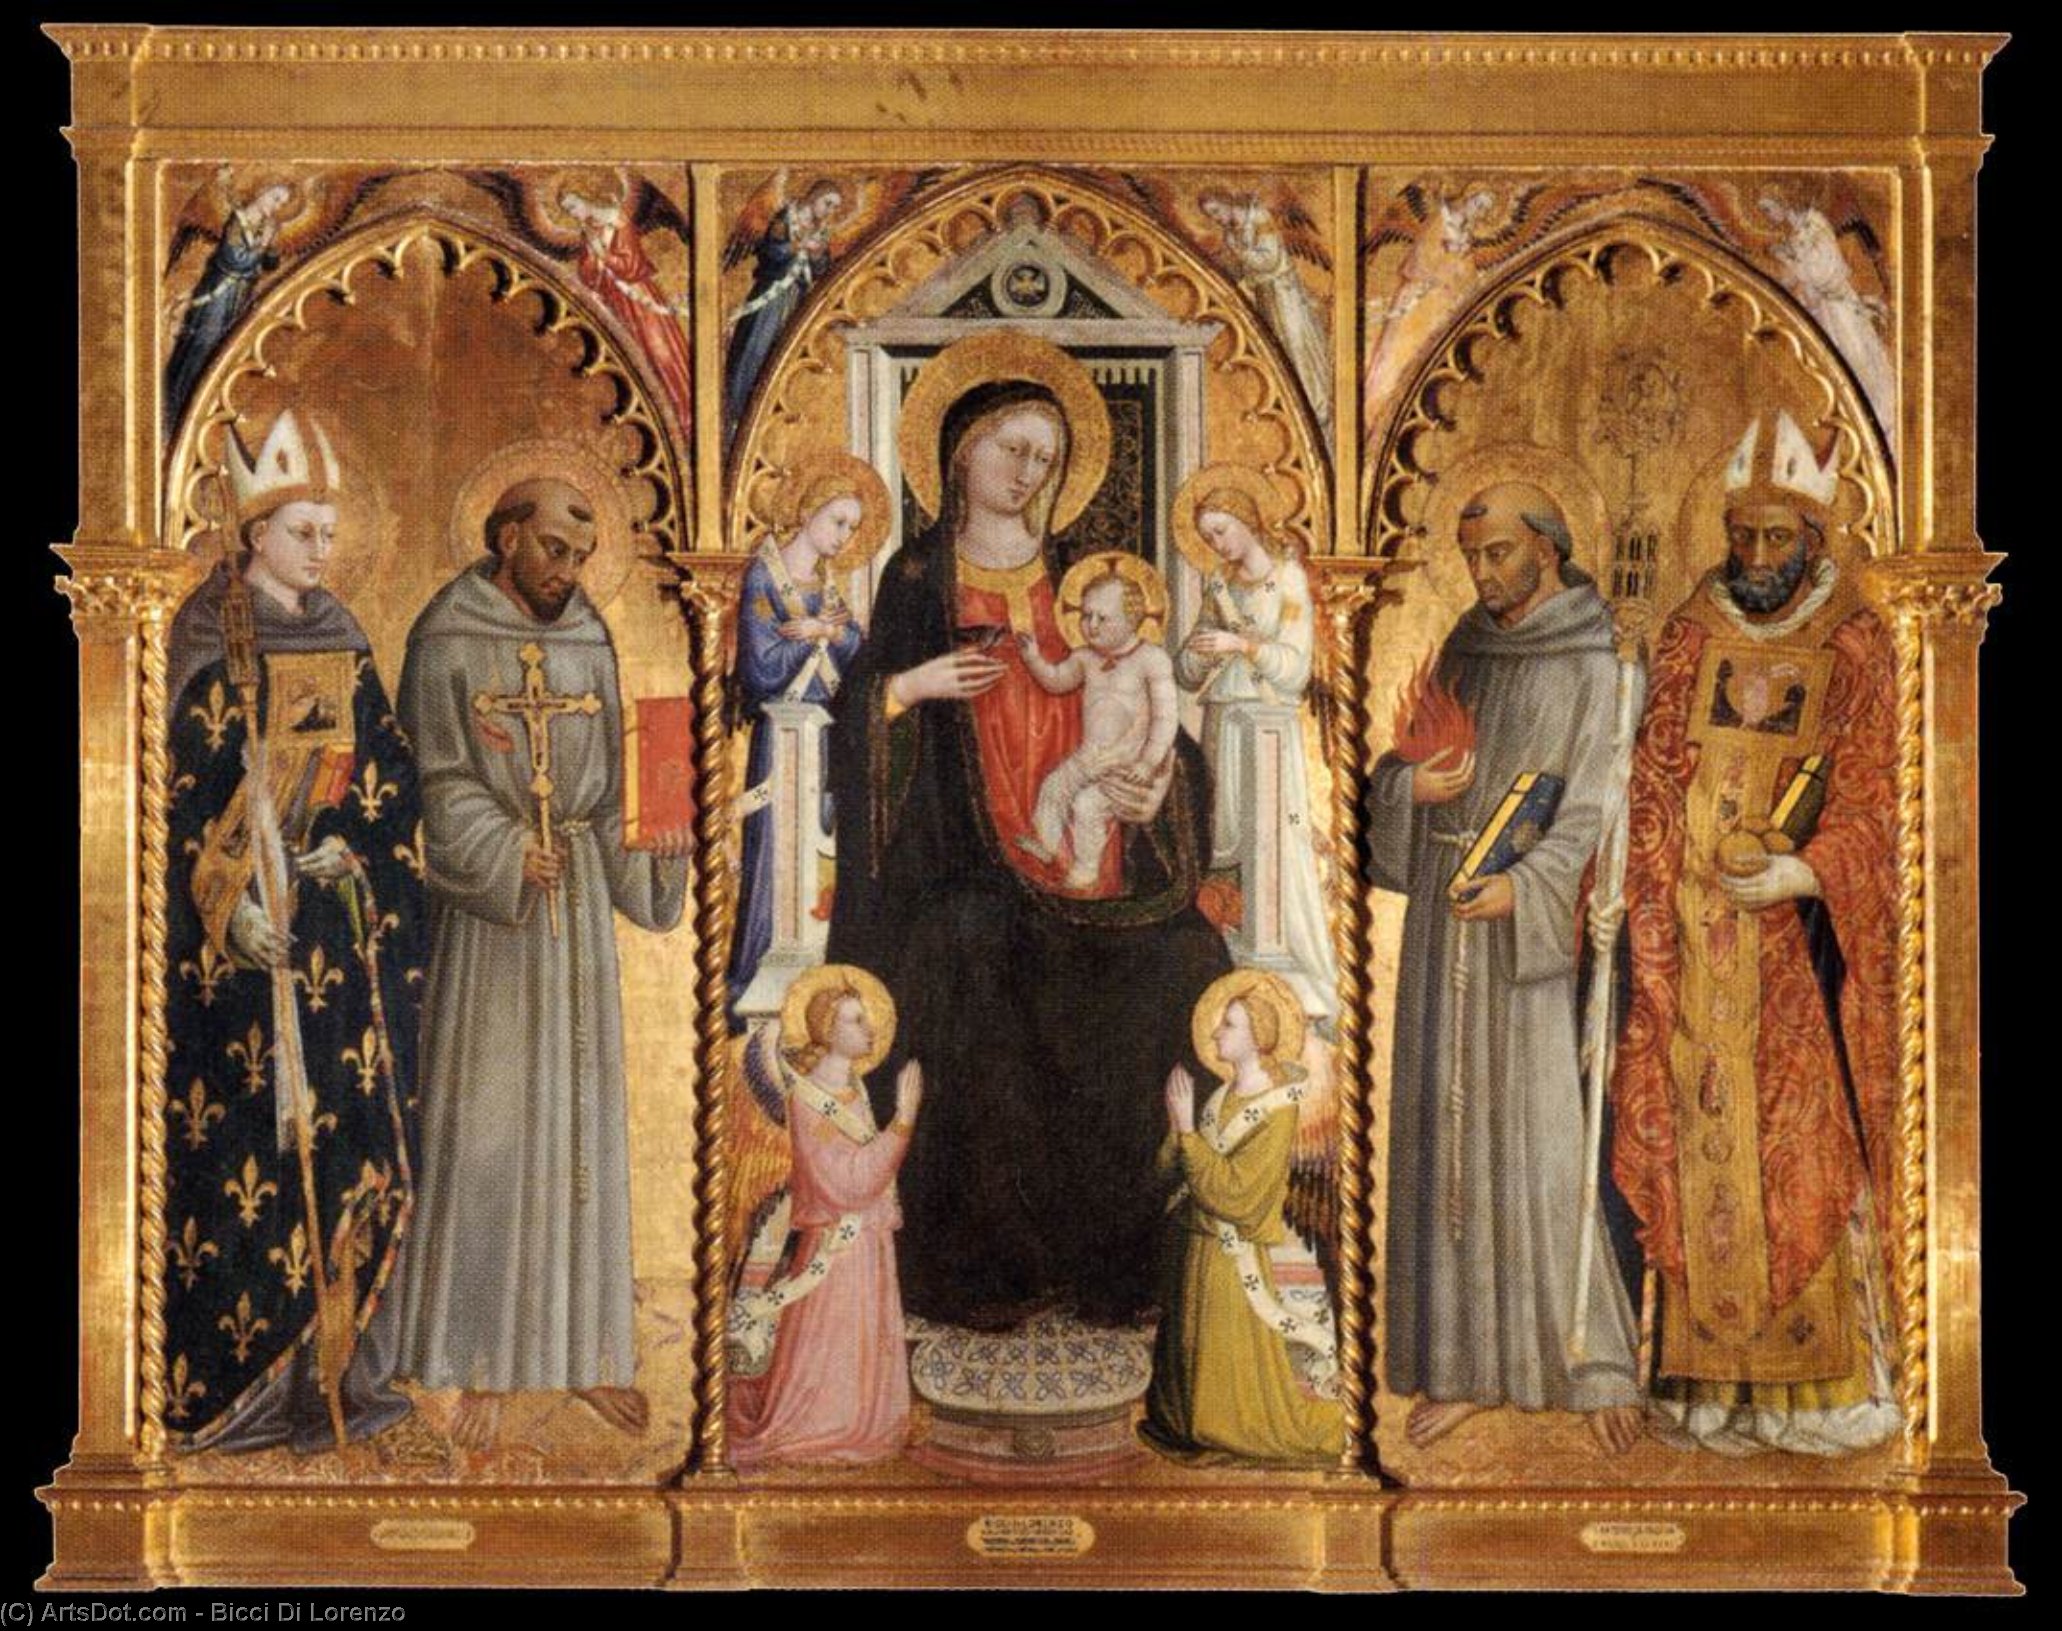 WikiOO.org - Encyclopedia of Fine Arts - Malba, Artwork Bicci Di Lorenzo - Madonna and Child with Saints and Angels